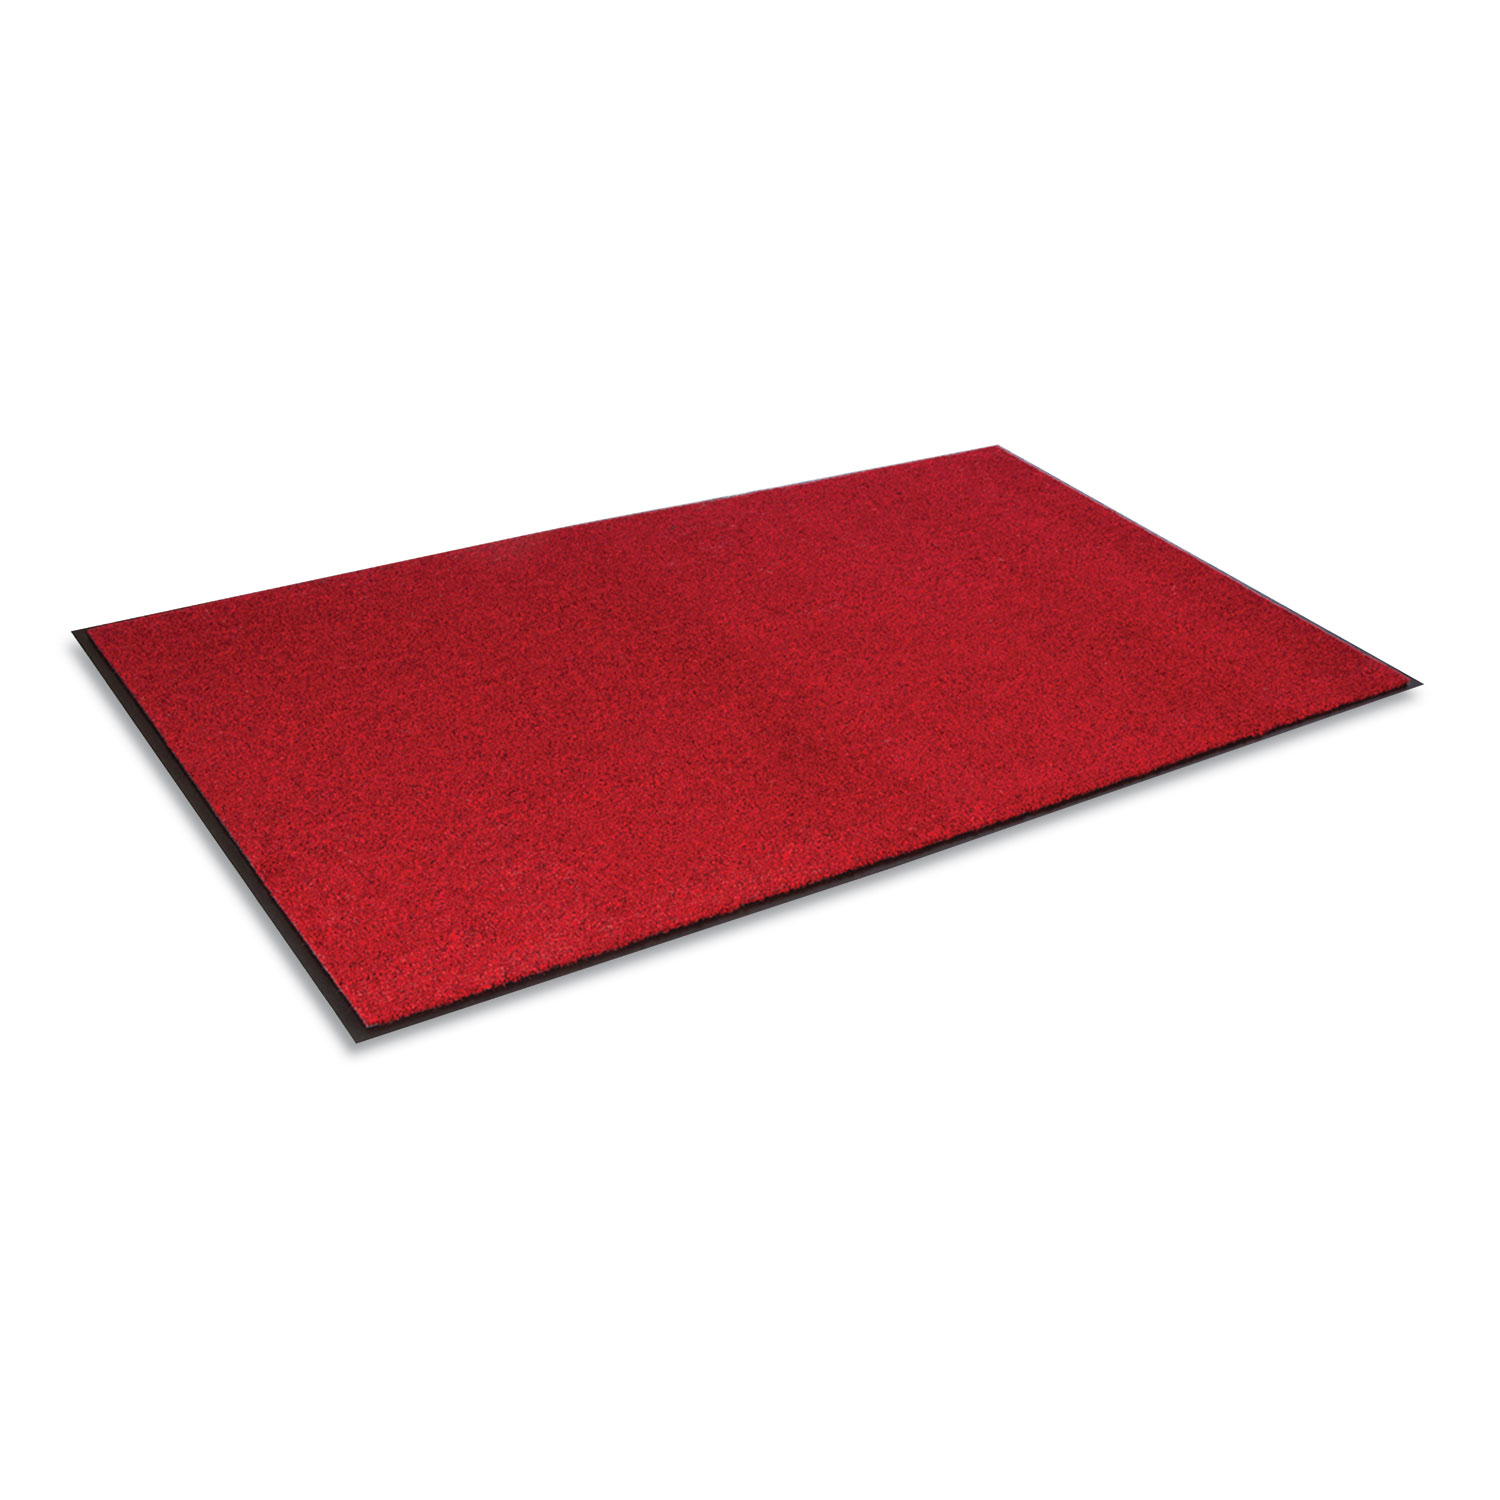  Crown GS 0046CR Rely-On Olefin Indoor Wiper Mat, 48 x 72, Castellan Red (CWNGS0046CR) 